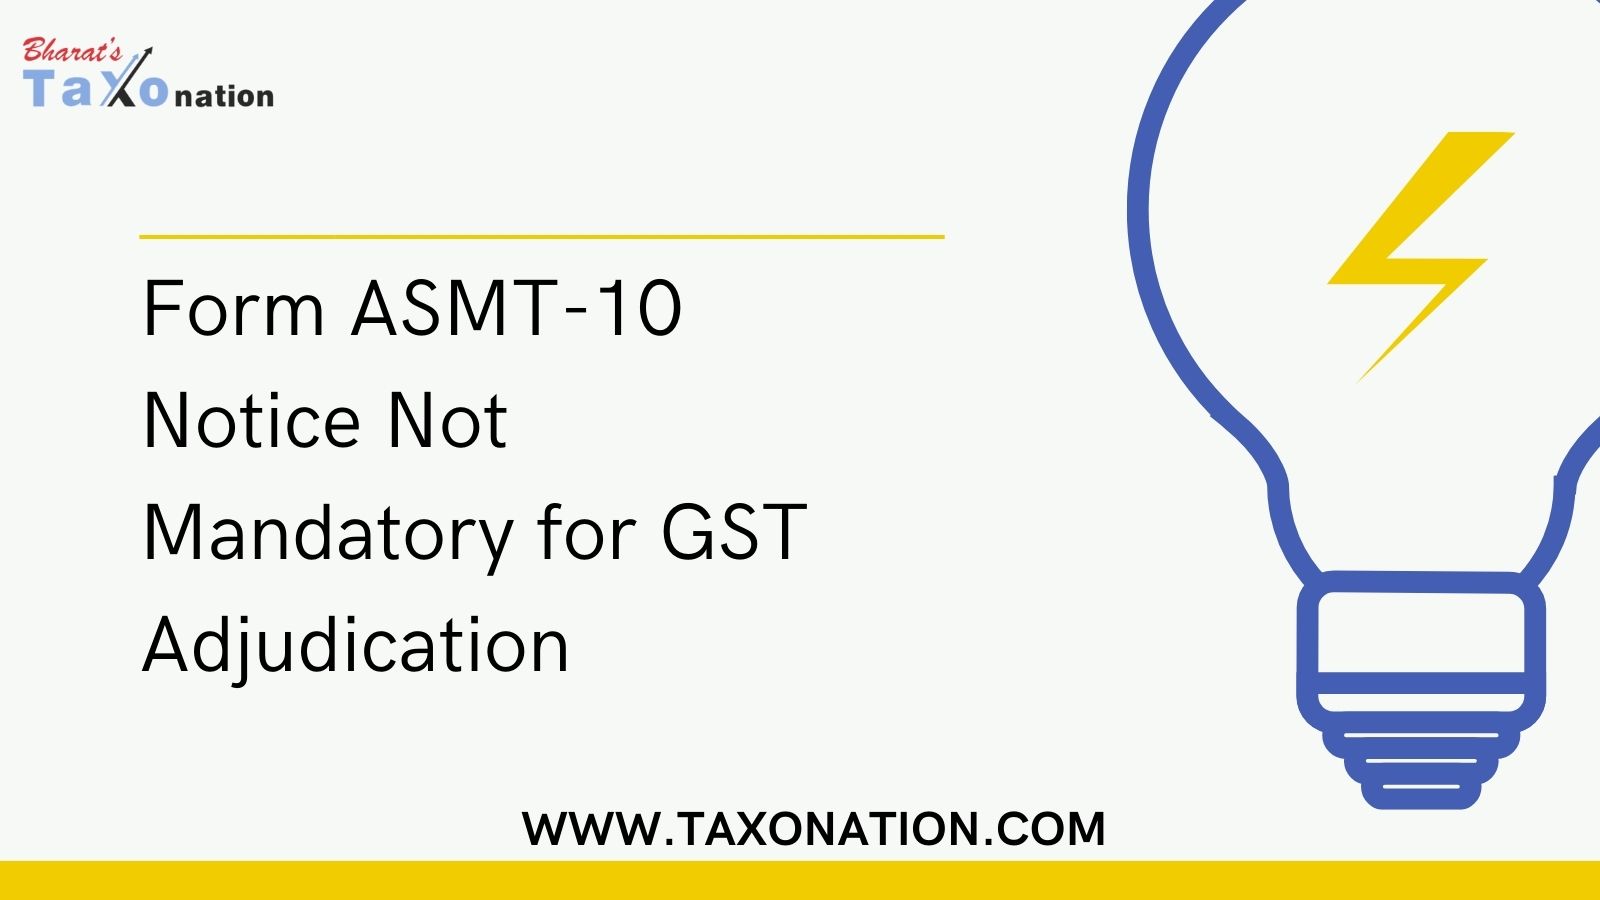 A notice in Form ASMT-10 doesn't have to be issued before the tax authorities can decide on a tax case, even if they reviewed the tax returns.